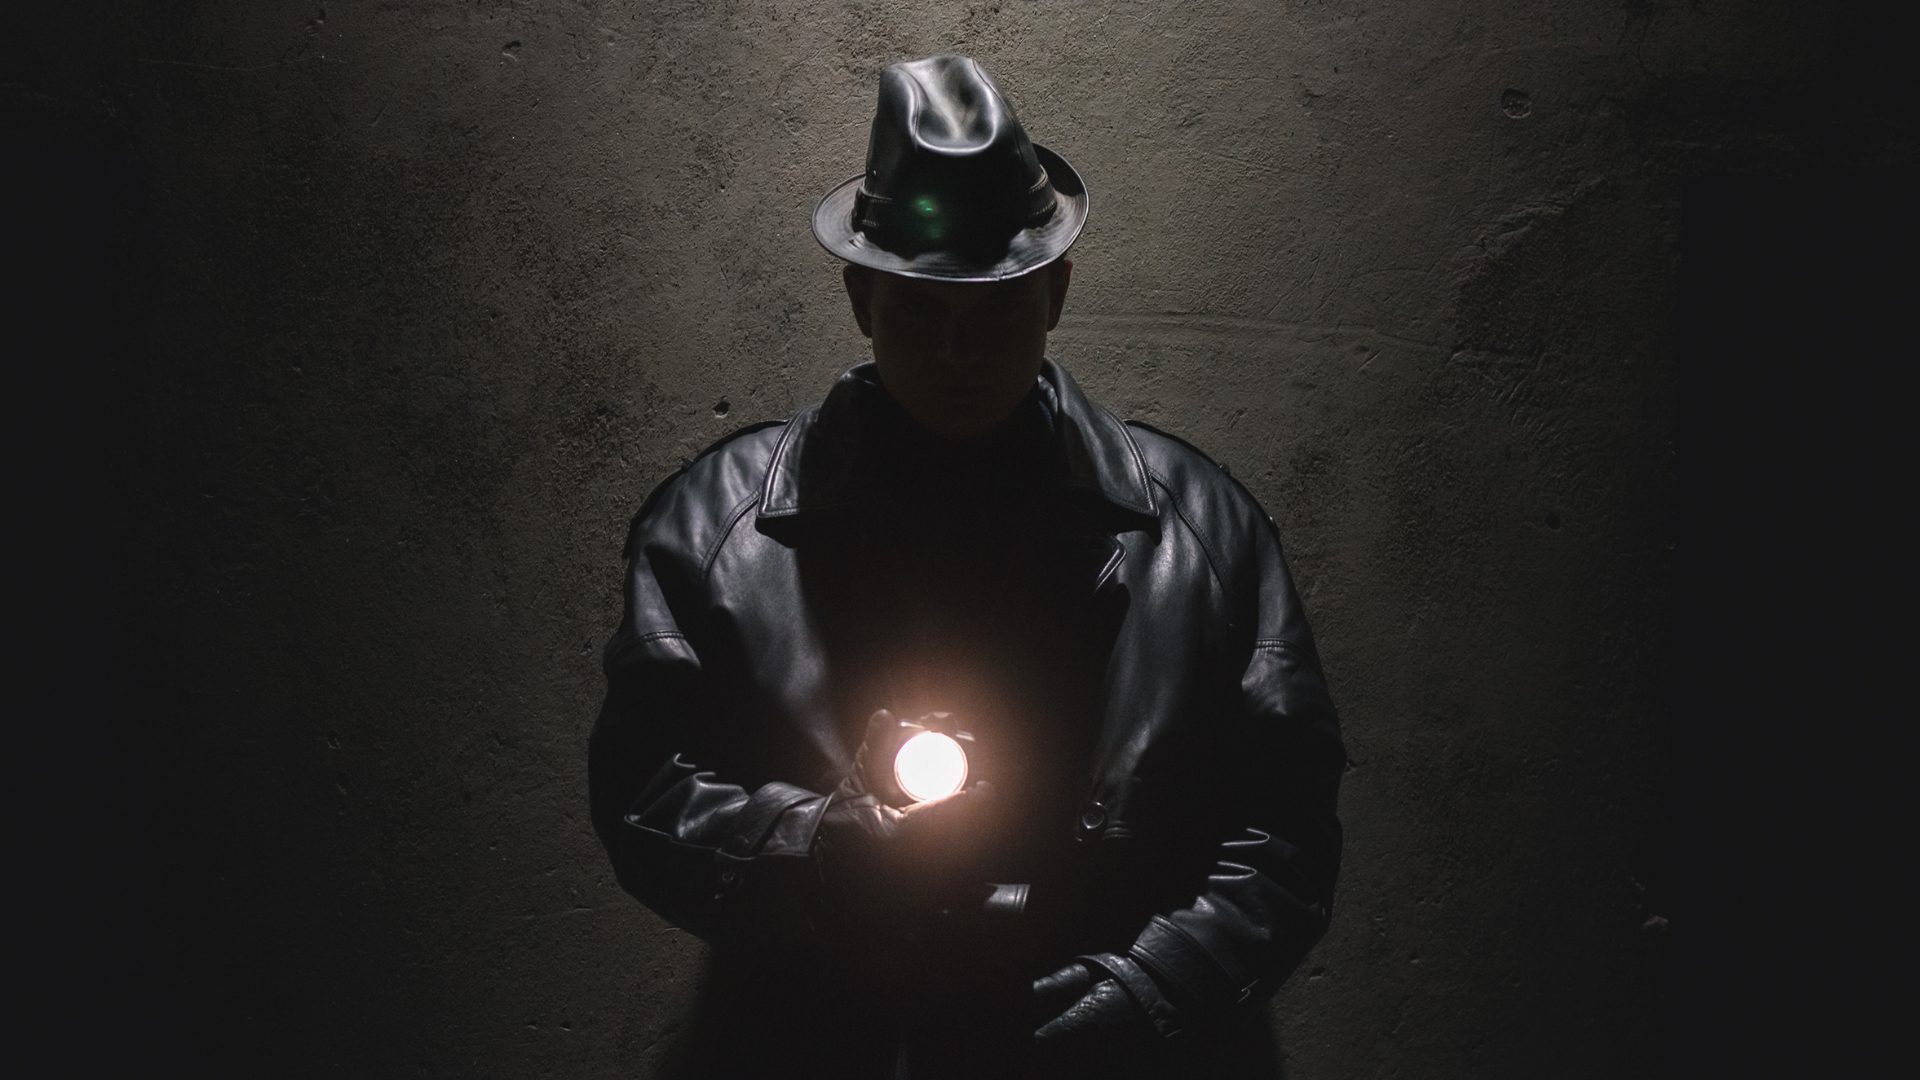 Man standing in shadows against a concrete wall. He is holding a warm-toned light in one hand in front of his chest and wearing a black leather jacket with a matching hat. He is staring into the camera and his face is barely visible